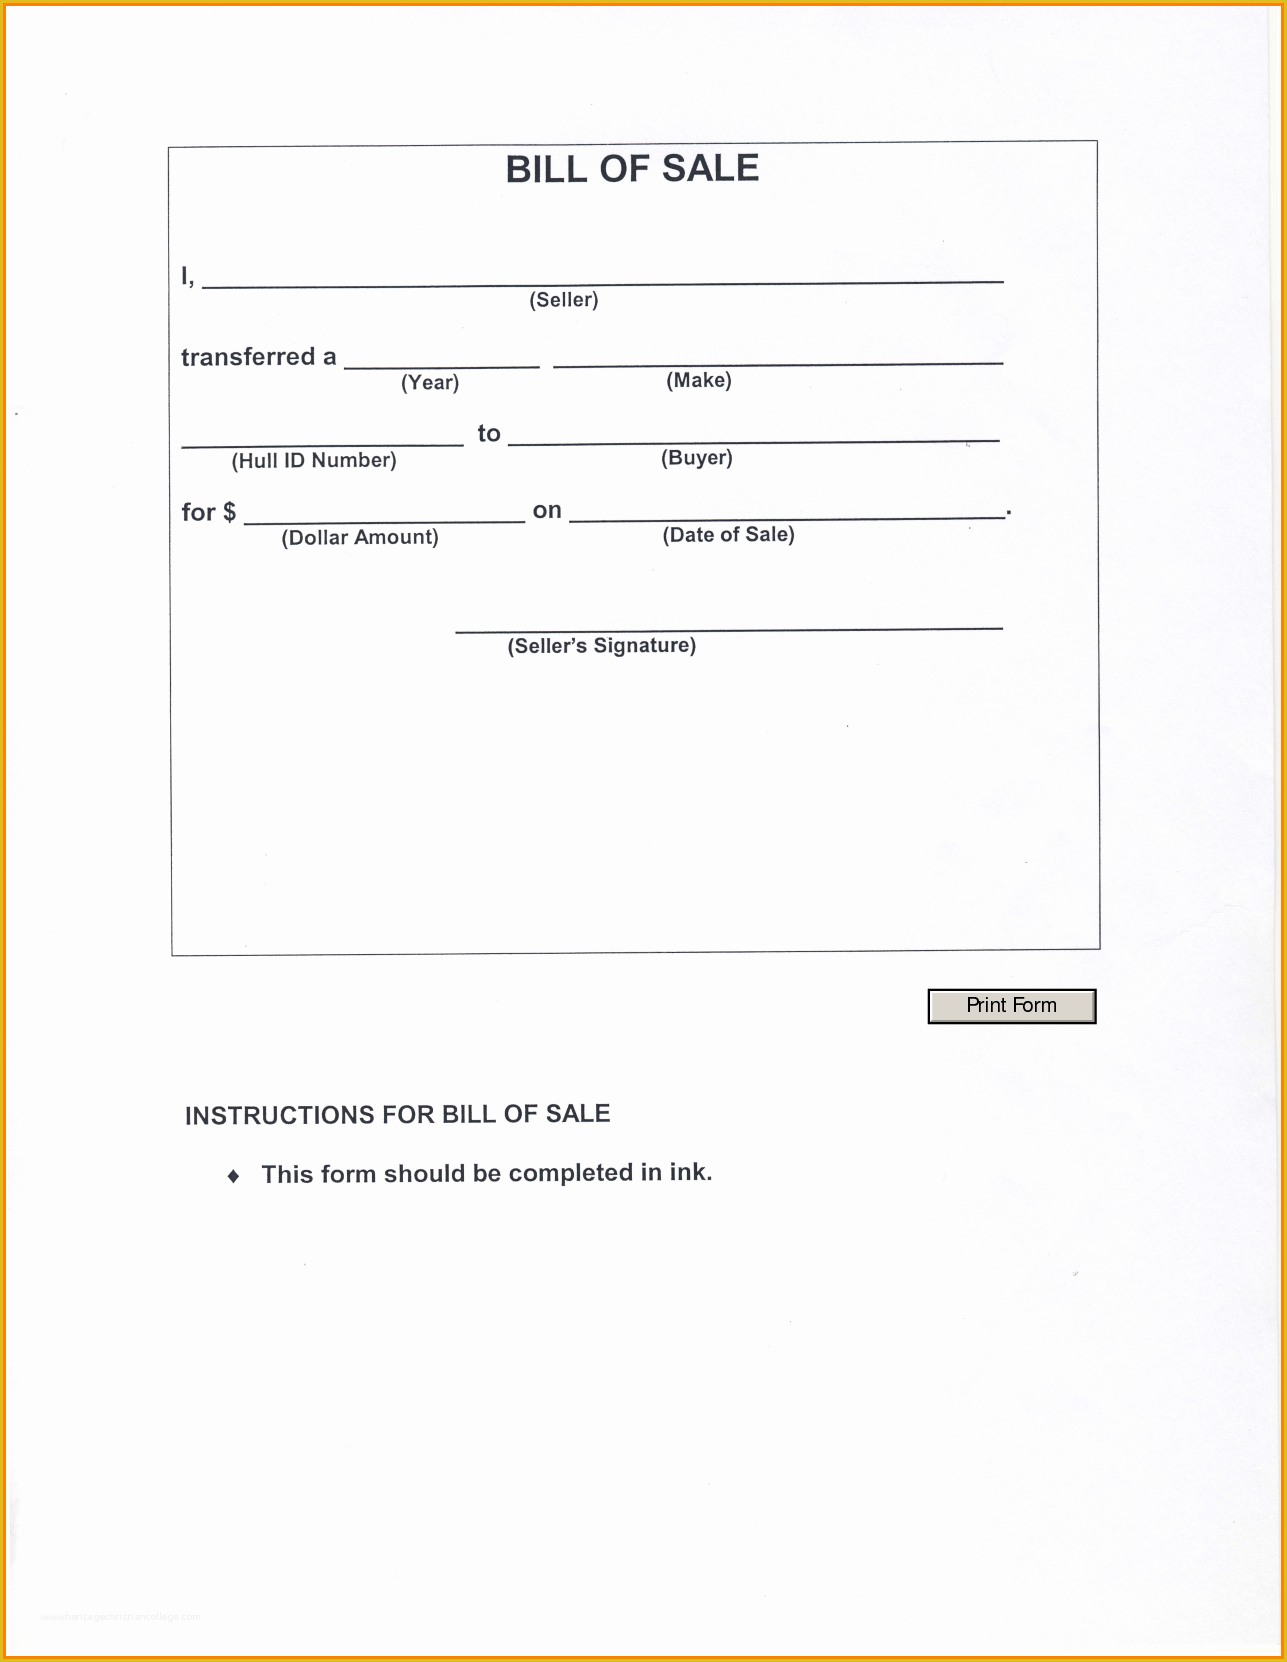 Free Bill Of Sale Template Pdf Of Search Results for “printable Bill Sale” – Calendar 2015